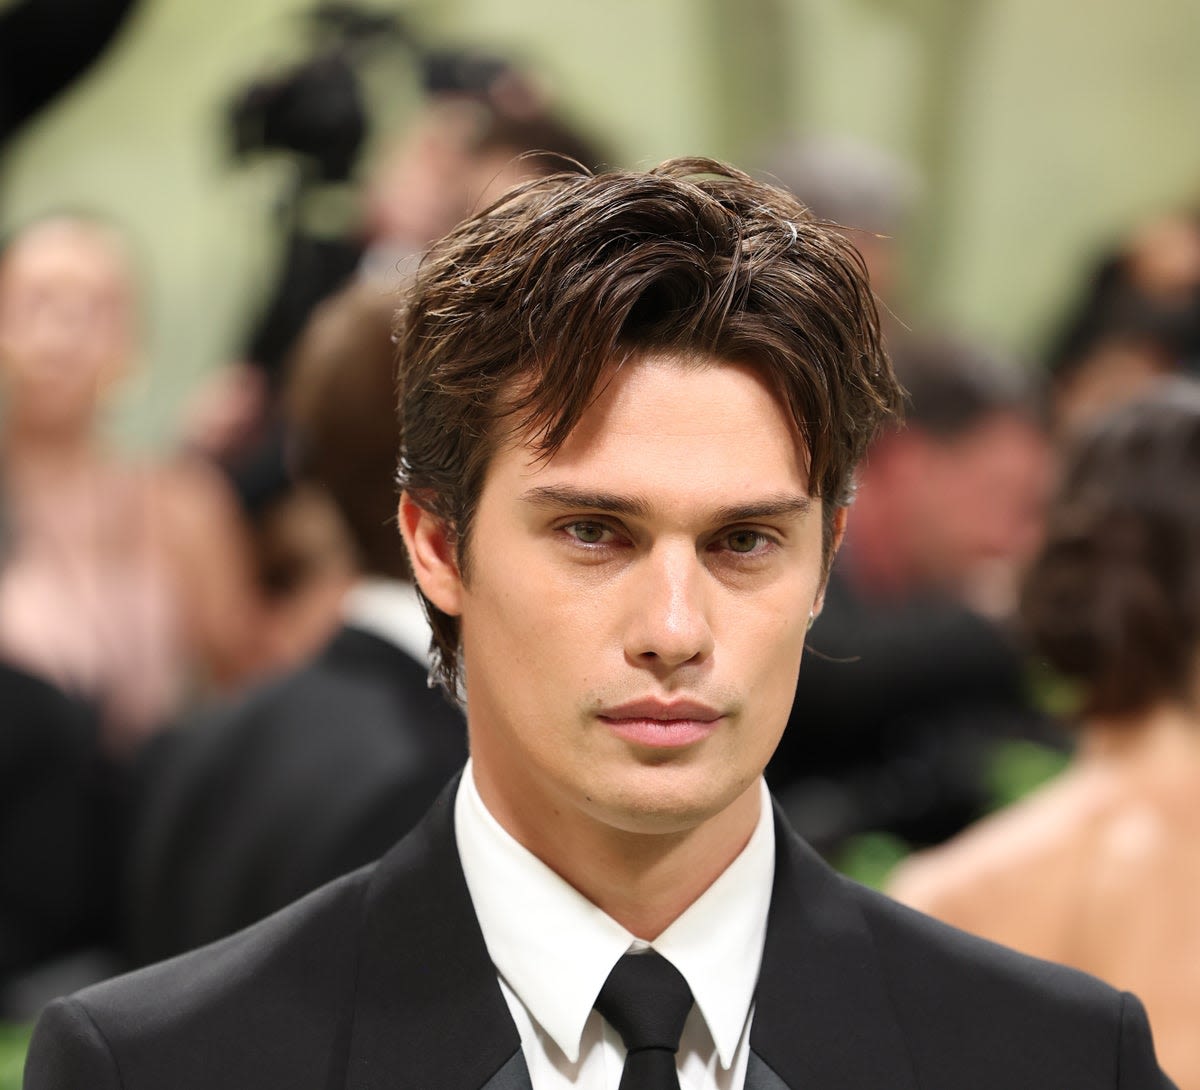 Nicholas Galitzine addresses his sexuality after starring in queer movies